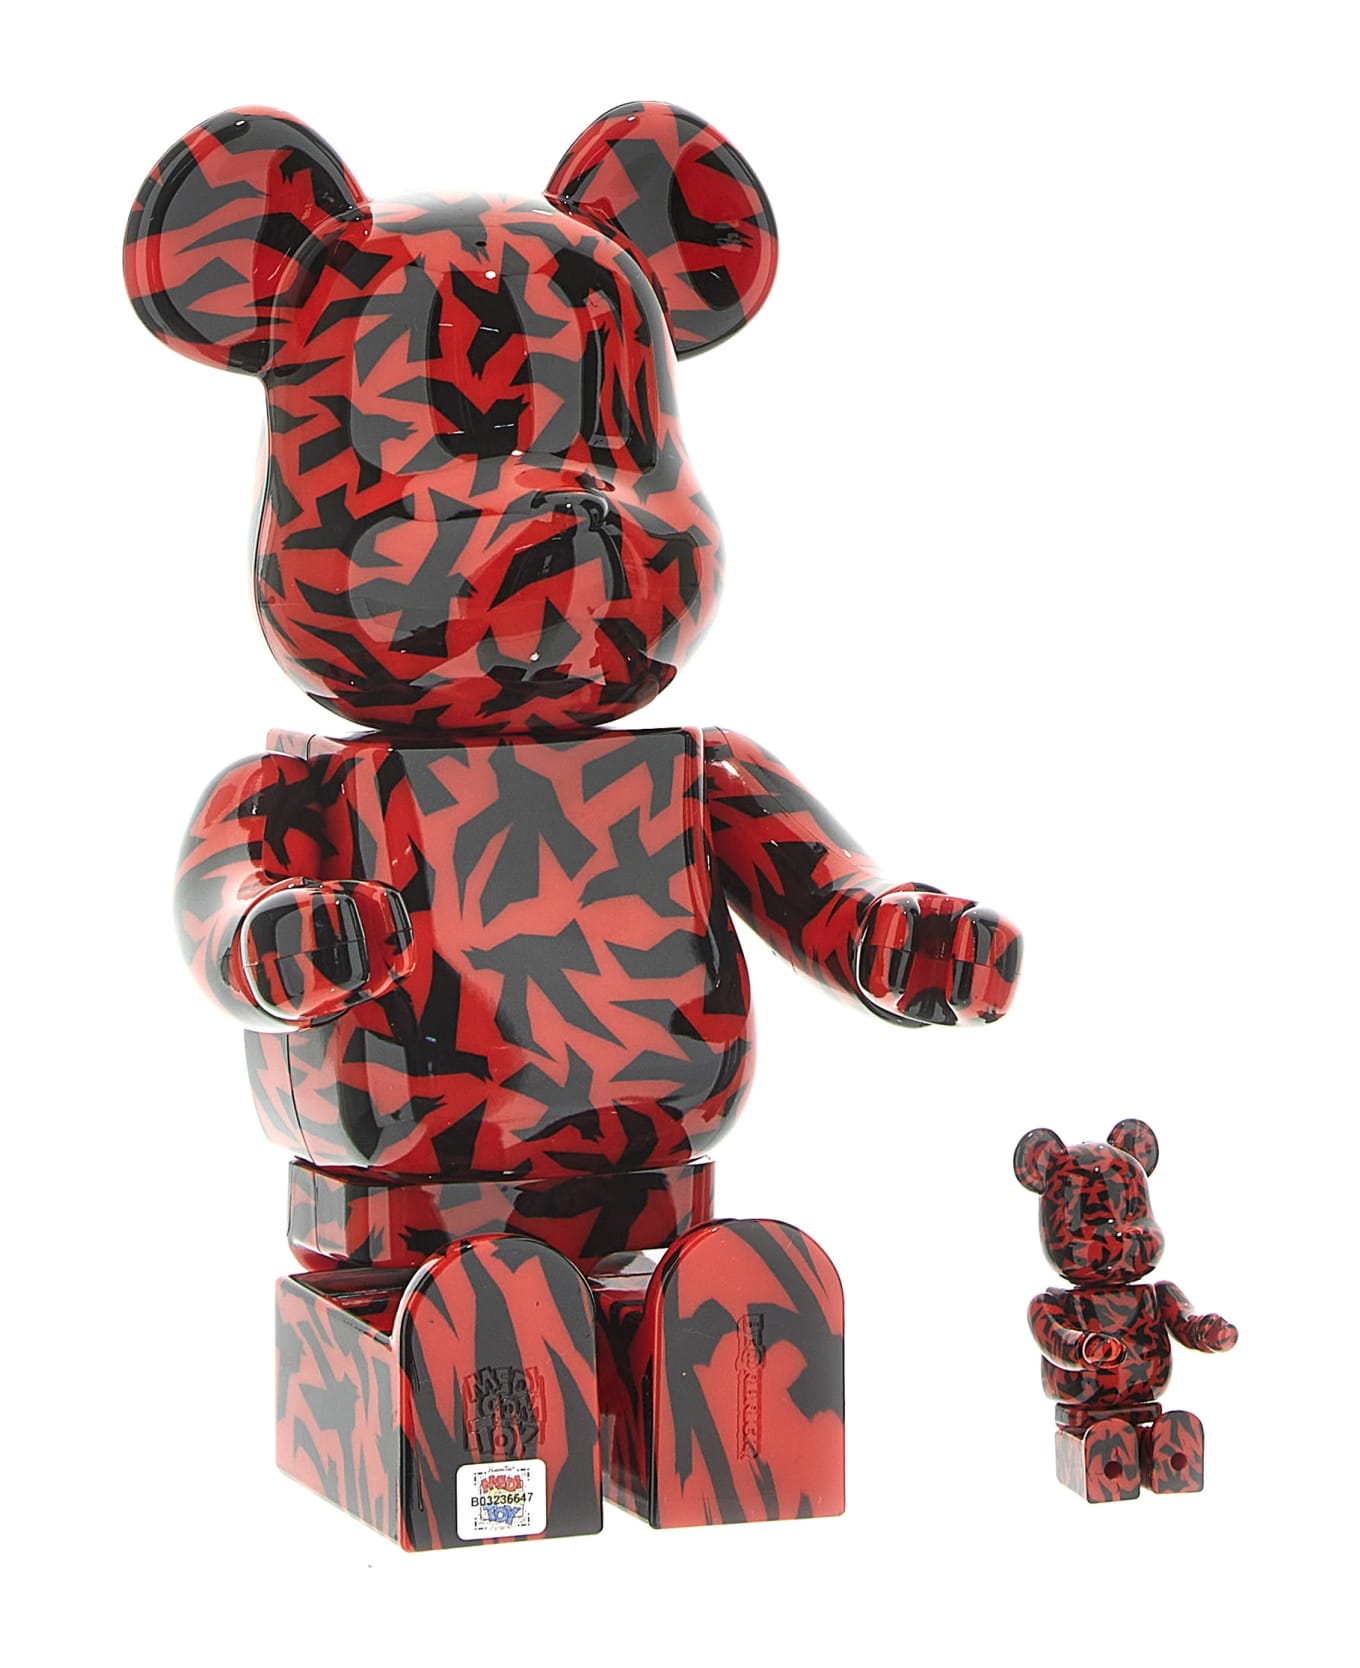 Medicom Toy Be@rbrick 100% & 400% Alfred Hitchcock The Birds - Multicolor